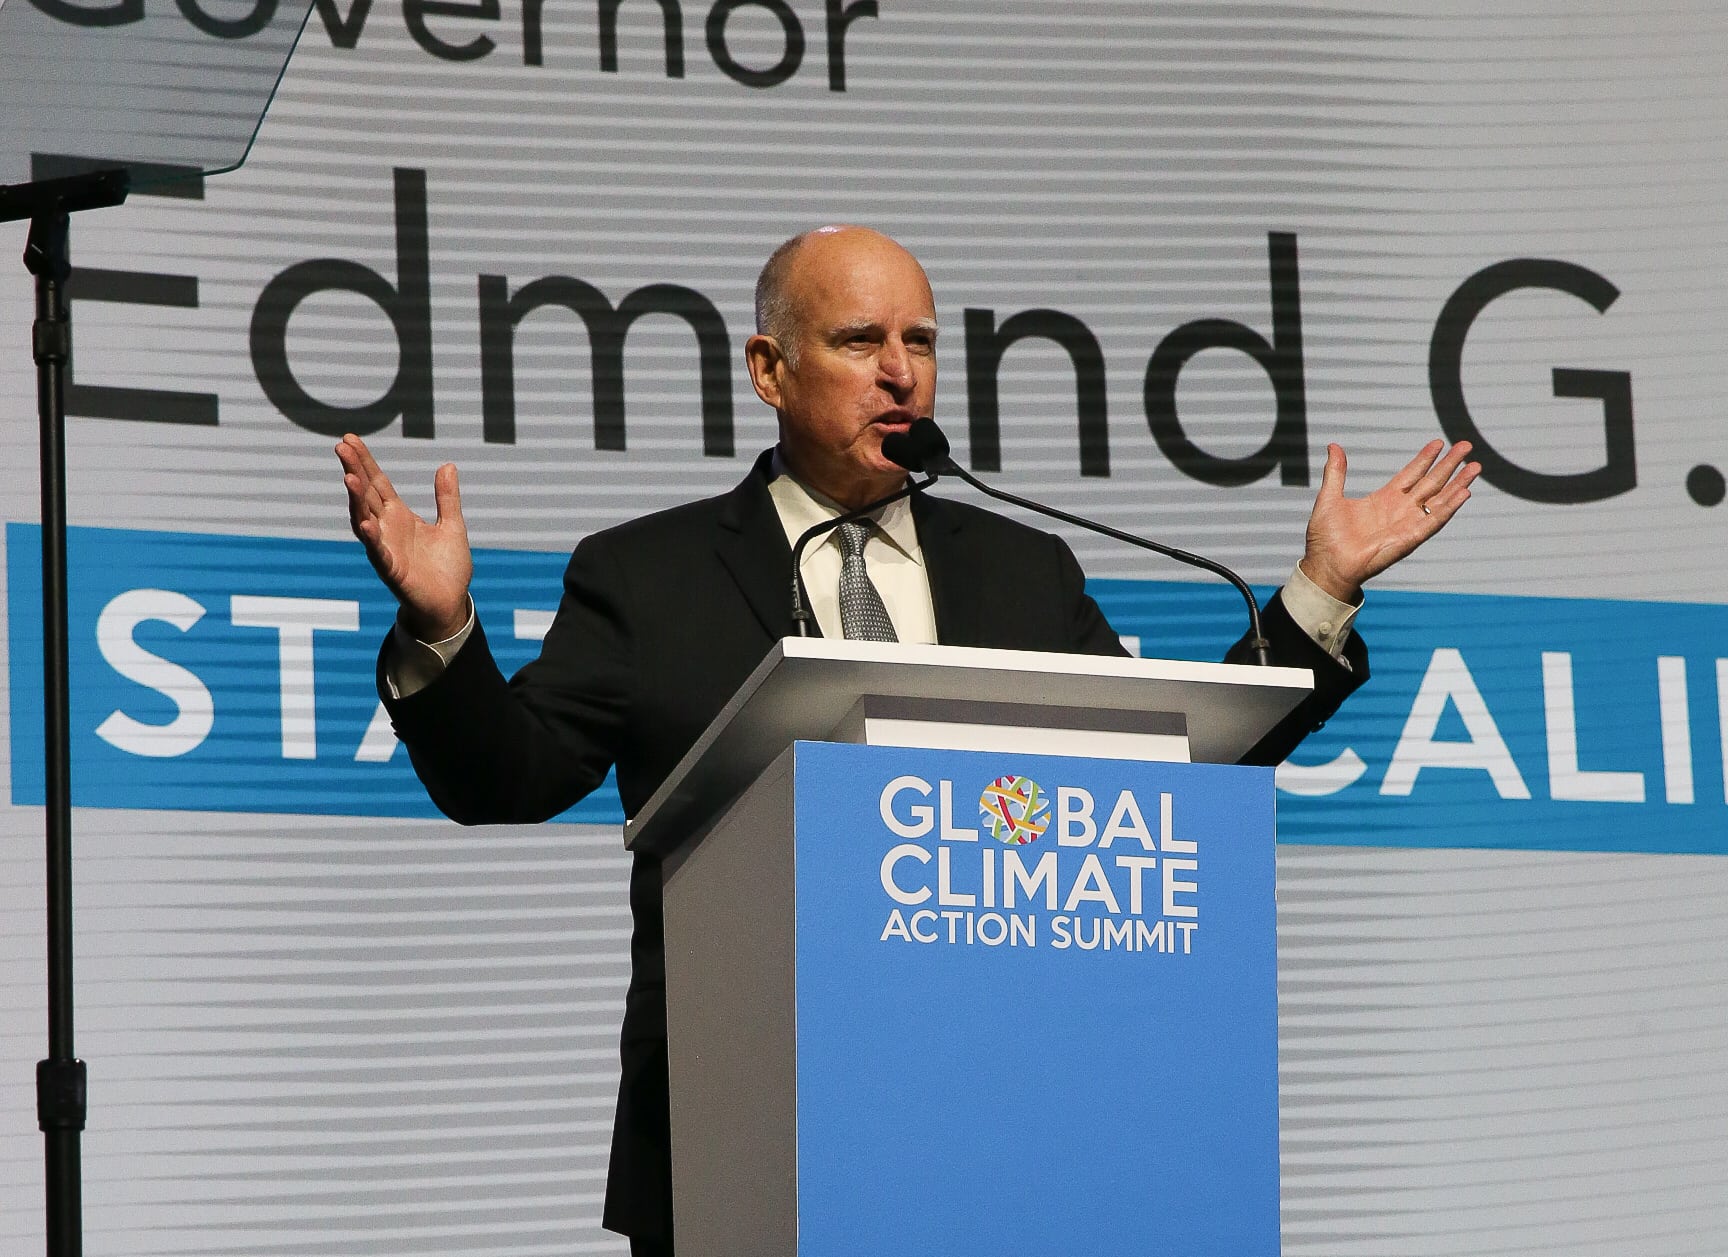 Governor Brown to Deliver Remarks at Closing Plenary of Global Climate Action Summit Today